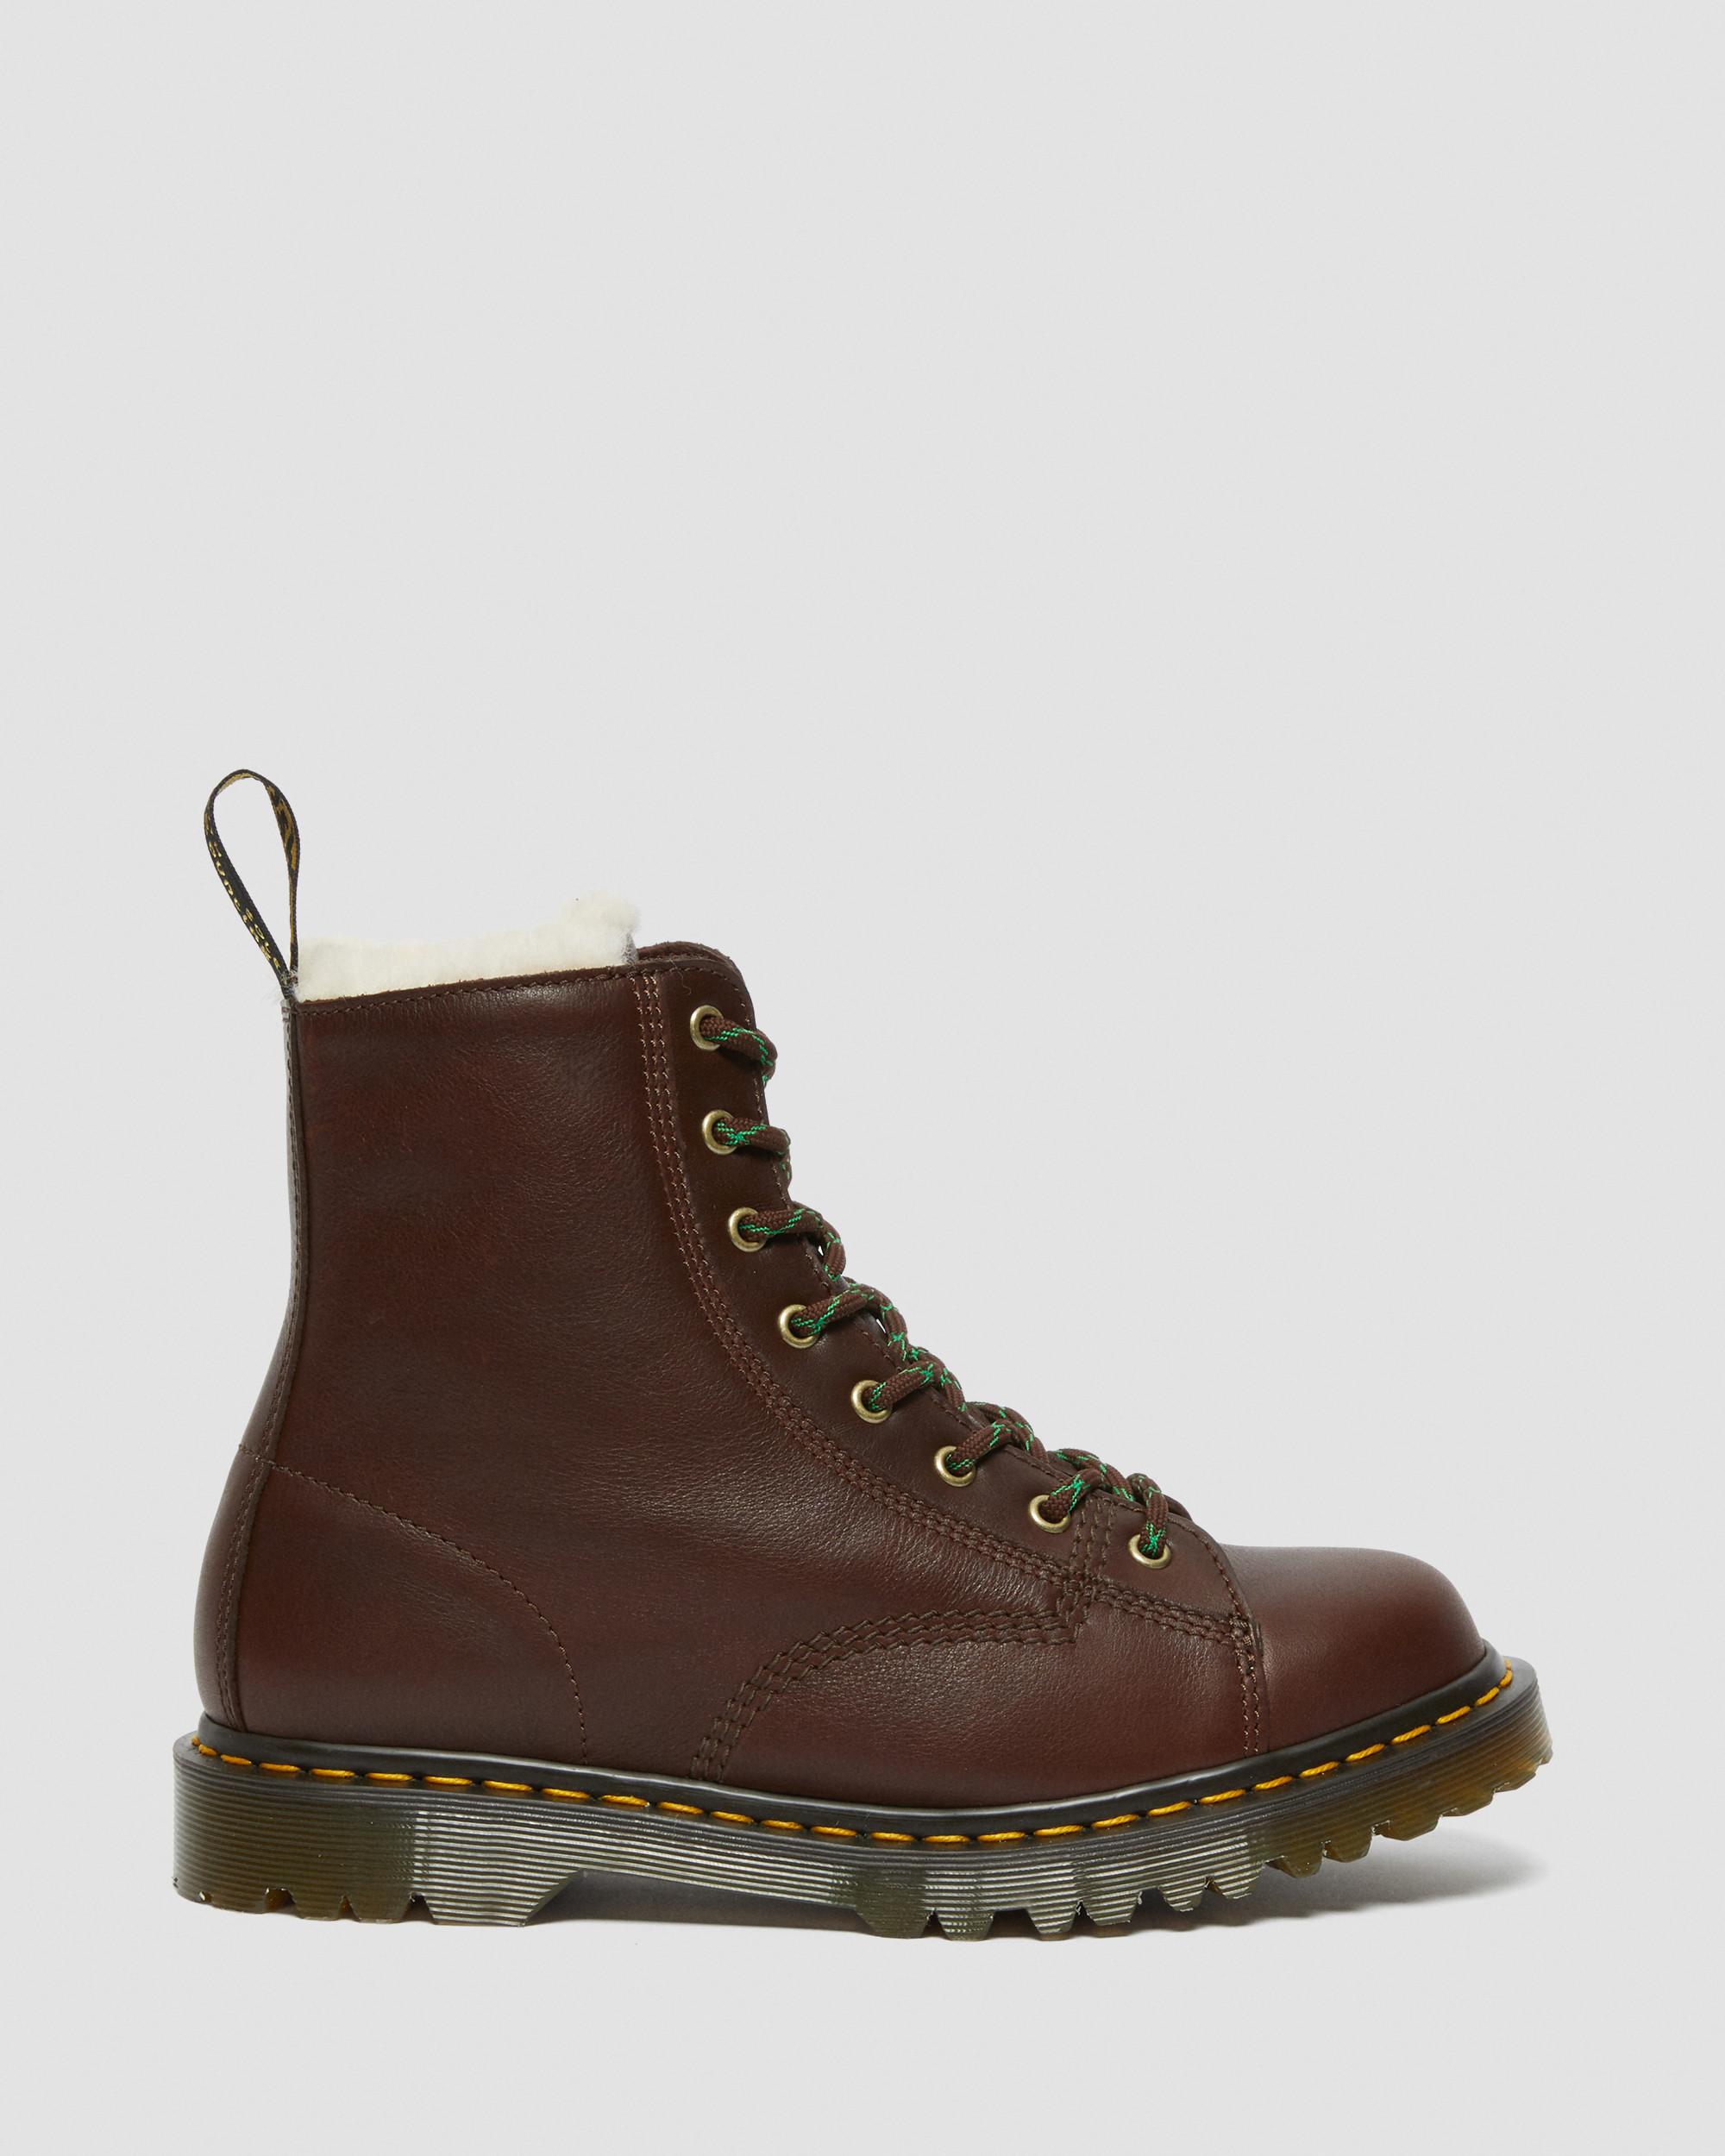 Barton Made in England Shearling Lined Leather BootsBarton Made in England  Shearling Lined Leather Boots Dr. Martens